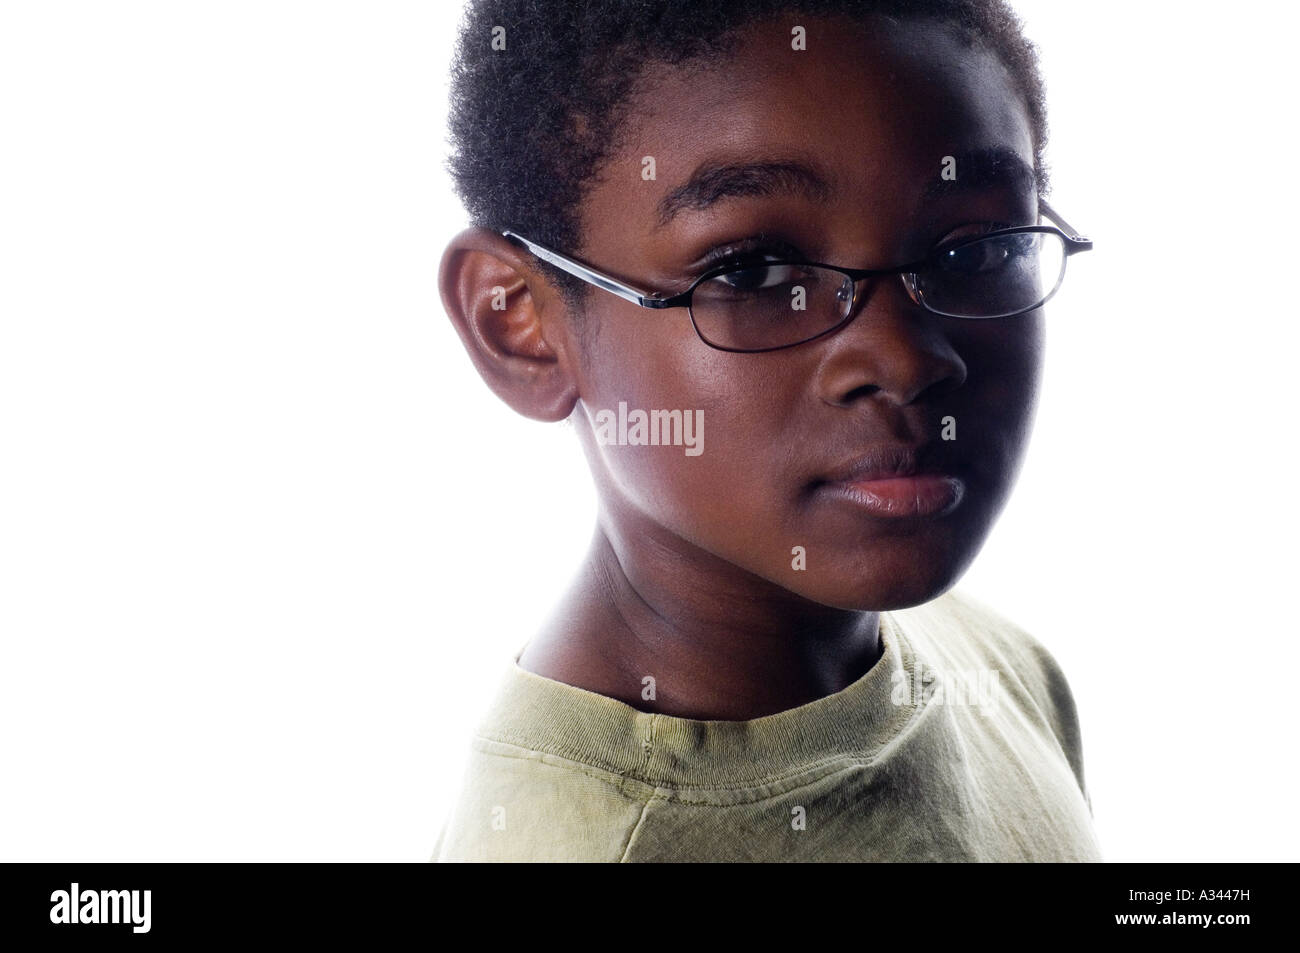 Portrait of an 8 years black child looking at camera against a white background Stock Photo